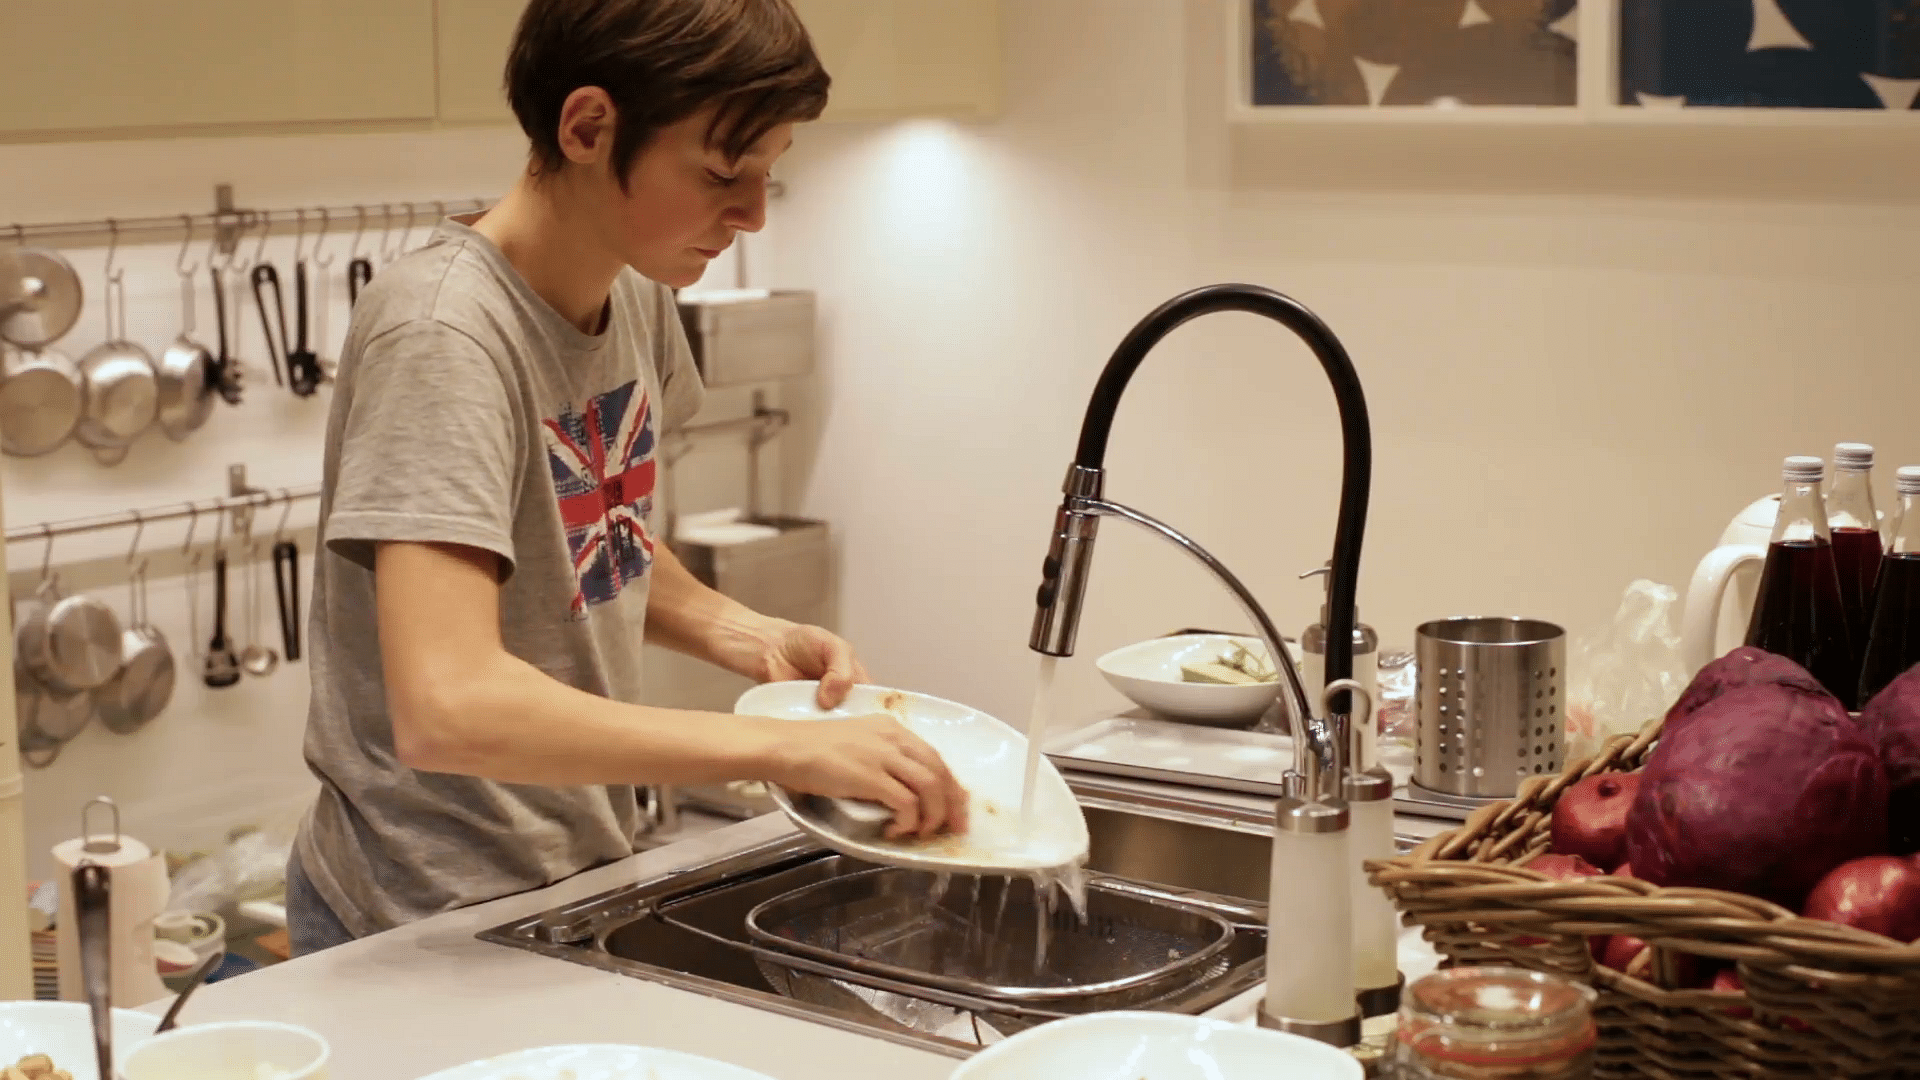 american mom gives household task to their children to get IPhone